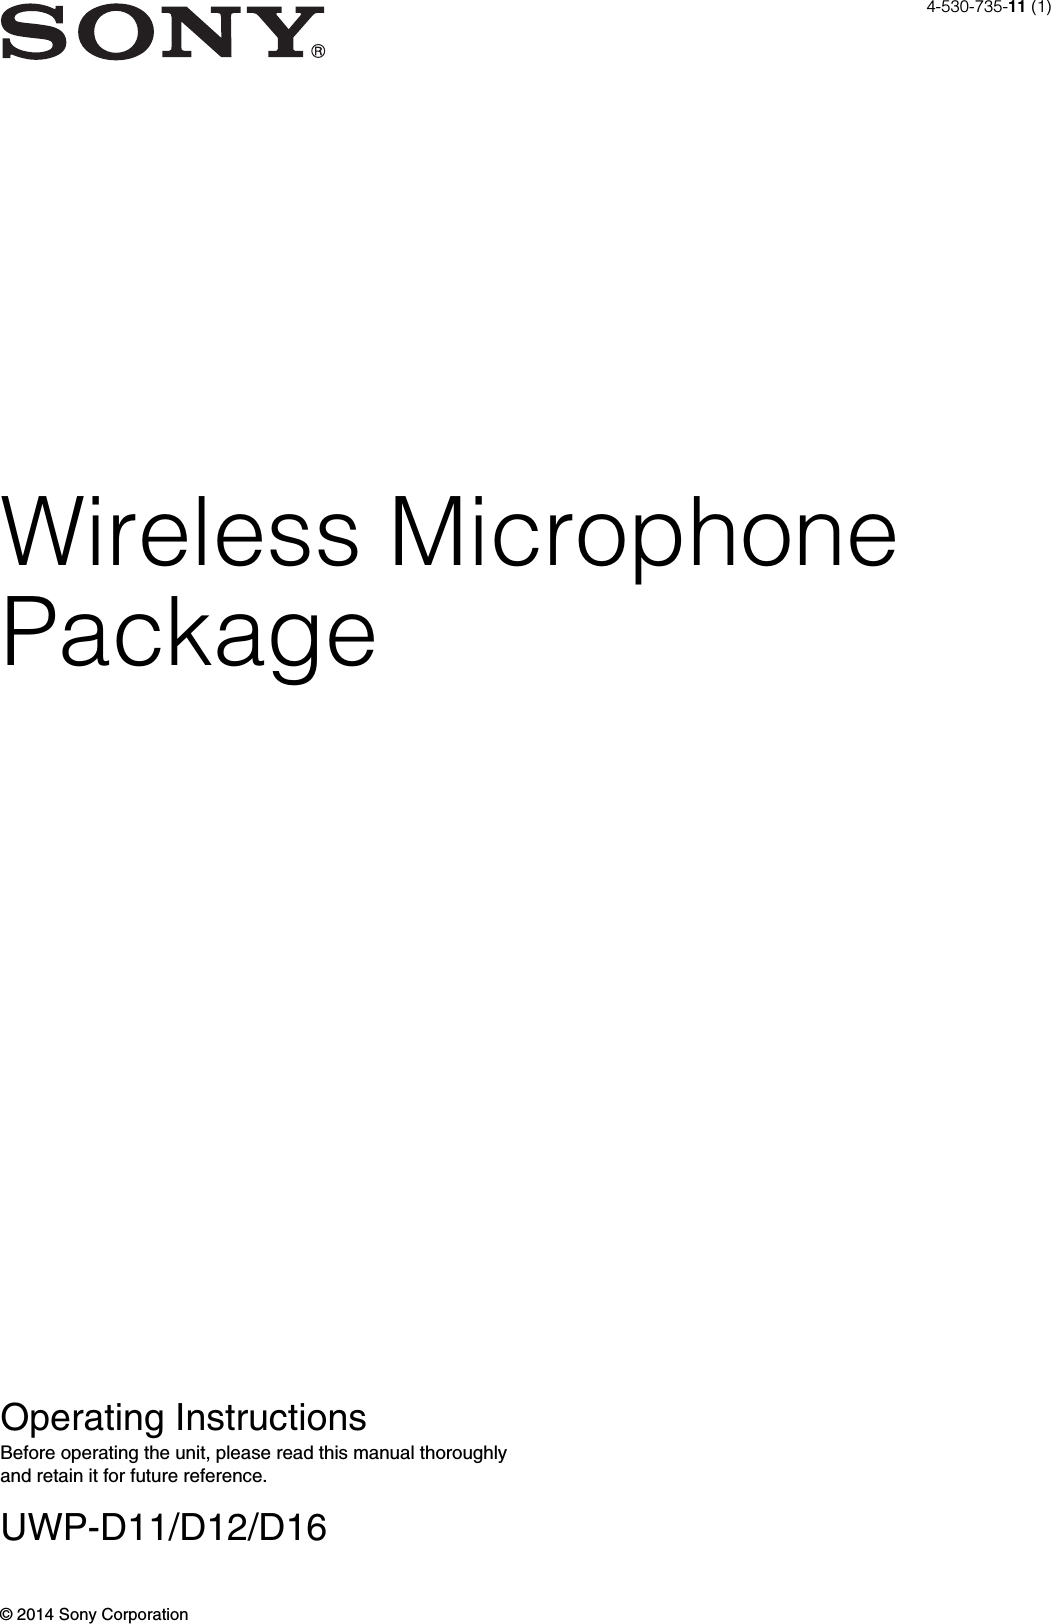 Wireless MicrophonePackageOperating InstructionsBefore operating the unit, please read this manual thoroughly and retain it for future reference.UWP-D11/D12/D164-530-735-11 (1)© 2014 Sony Corporation